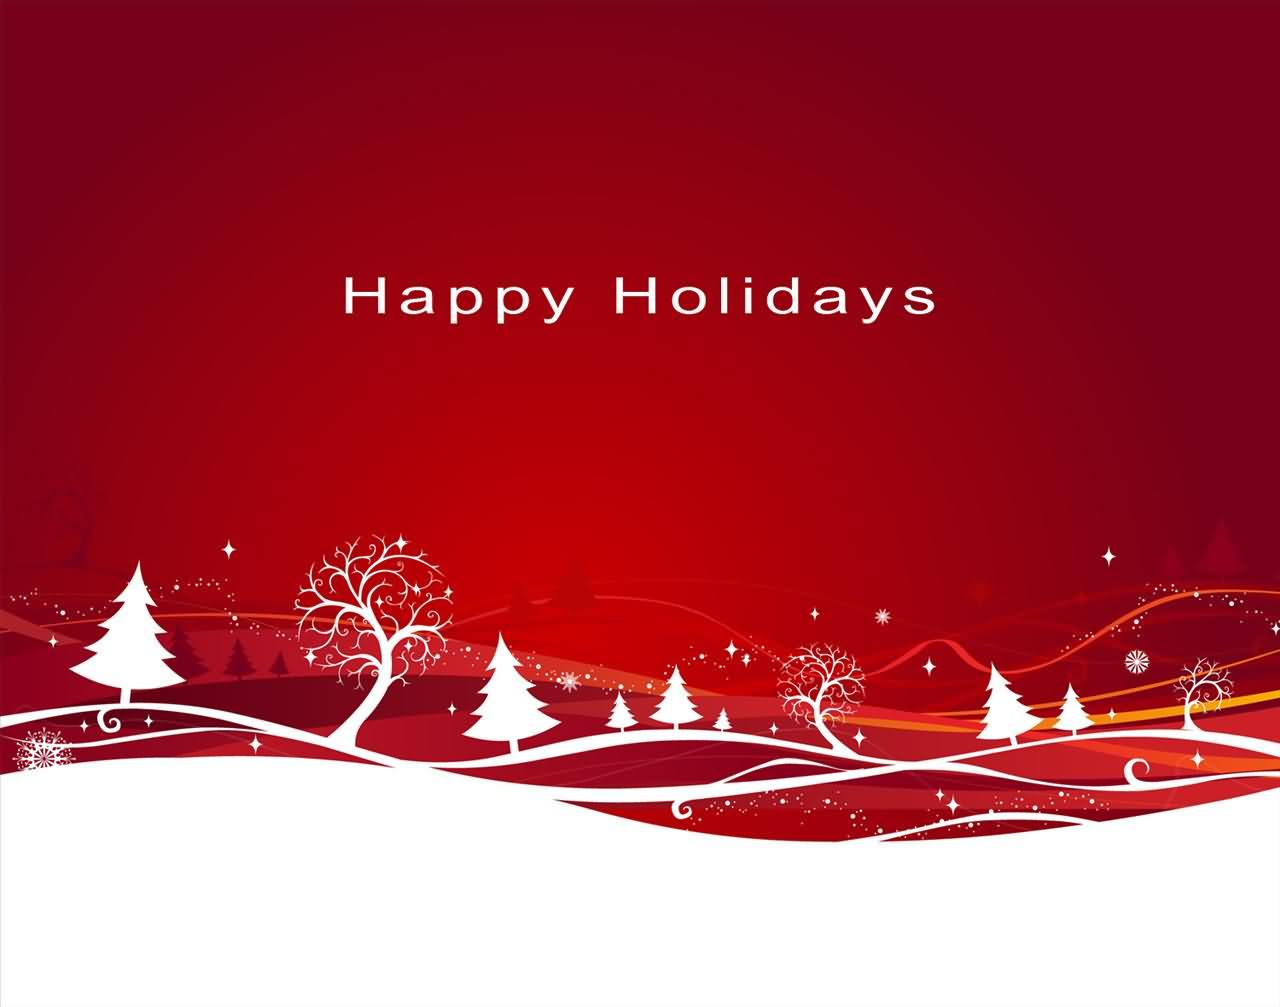 Happy Holidays Wallpapers Group (79+)